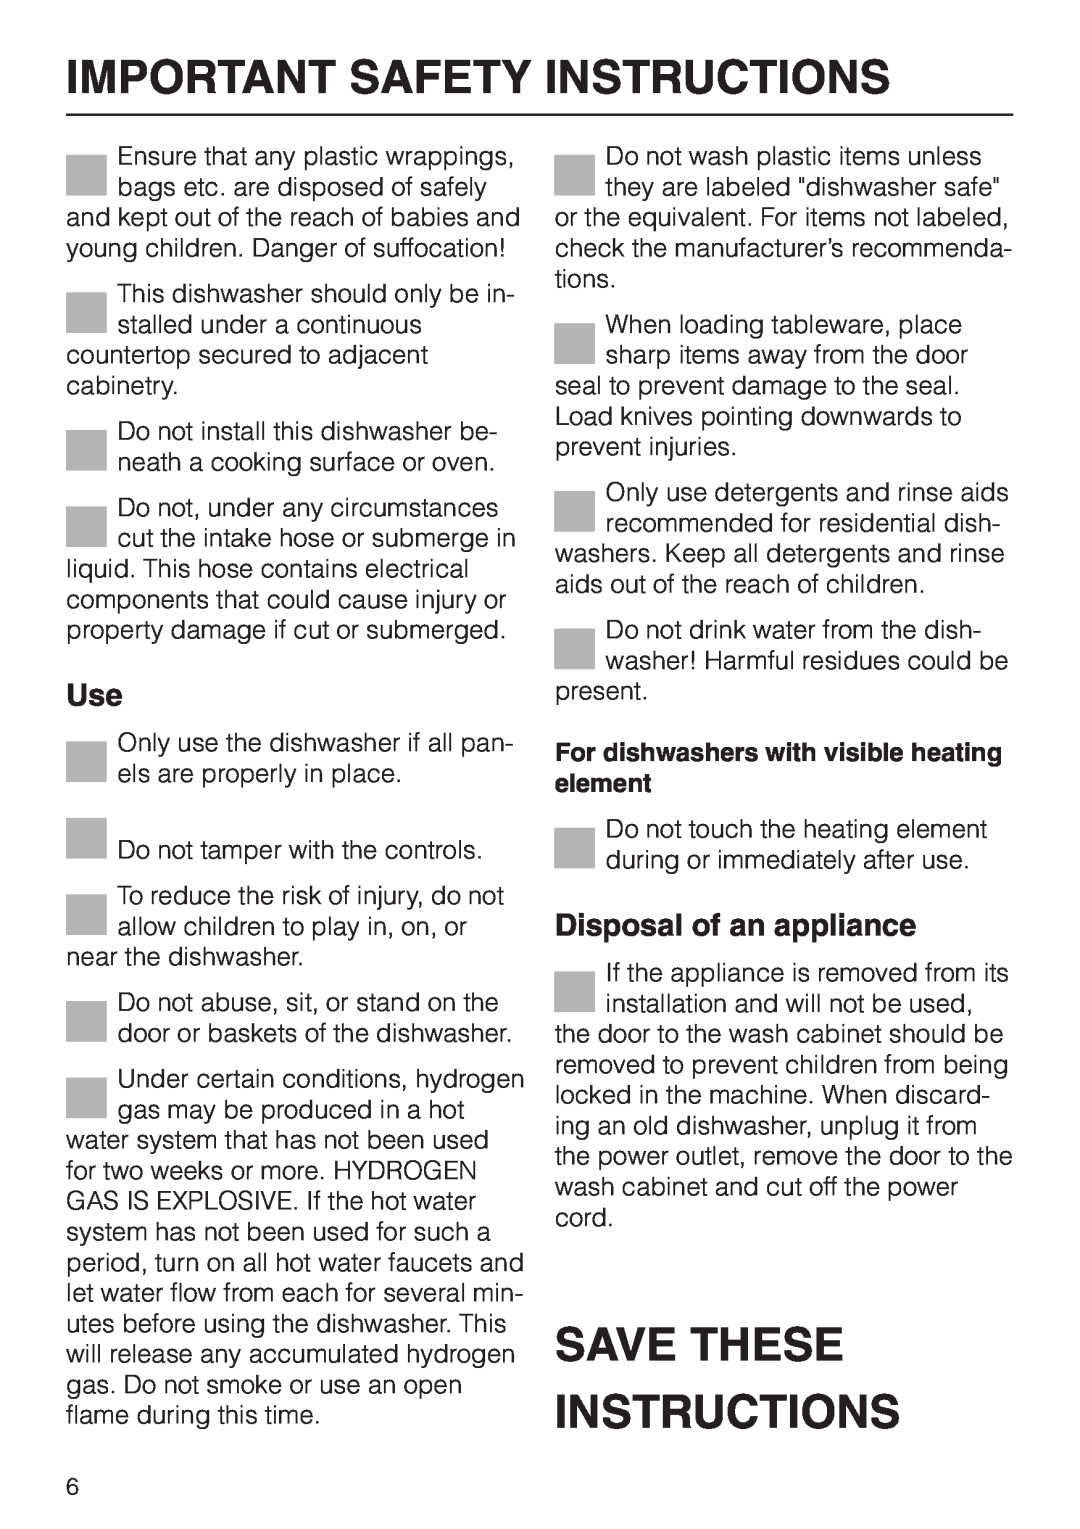 Miele G 856 SC ELITE Save These Instructions, Disposal of an appliance, Important Safety Instructions 